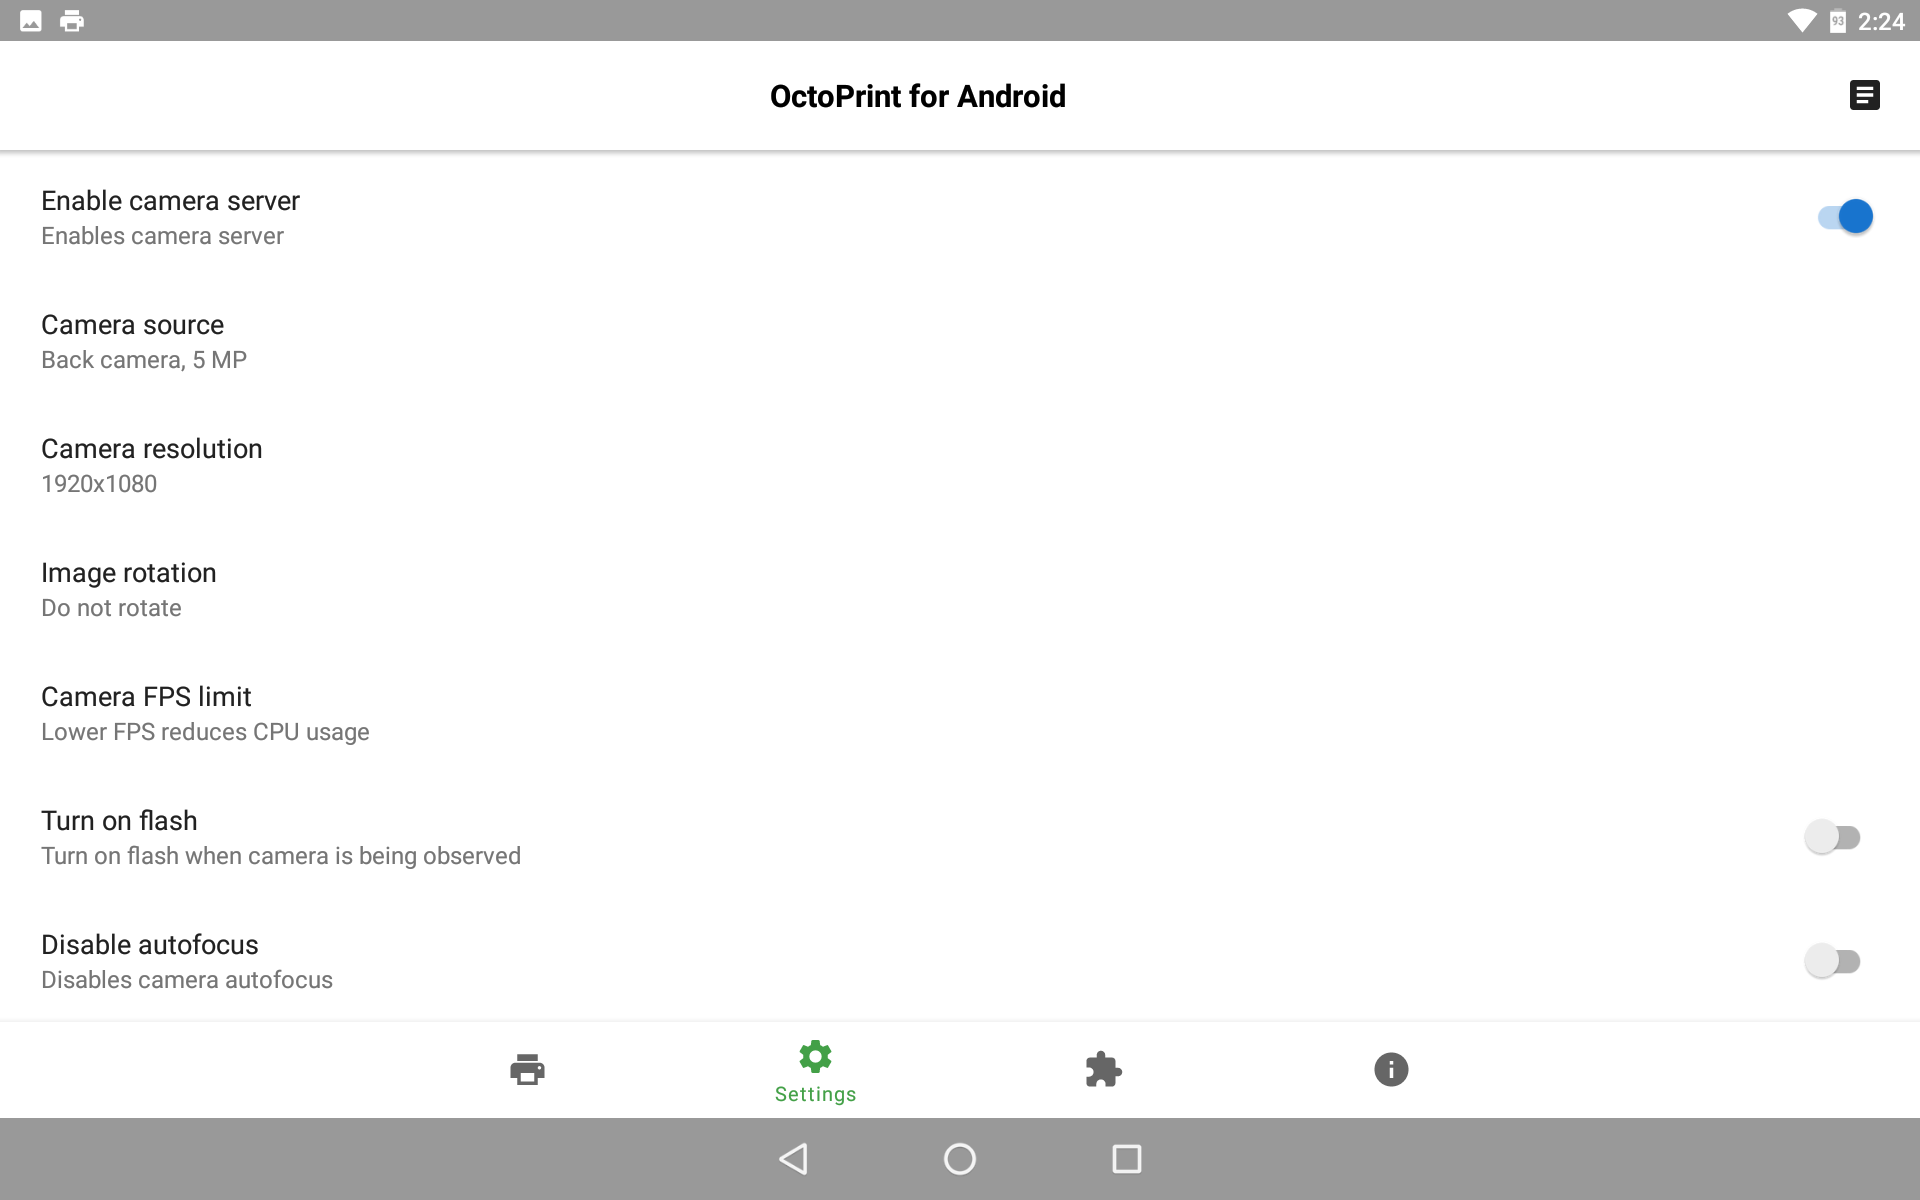 Octoprint for Android Webcam Settings | OctoPrint for Android: Recycle your old phone!